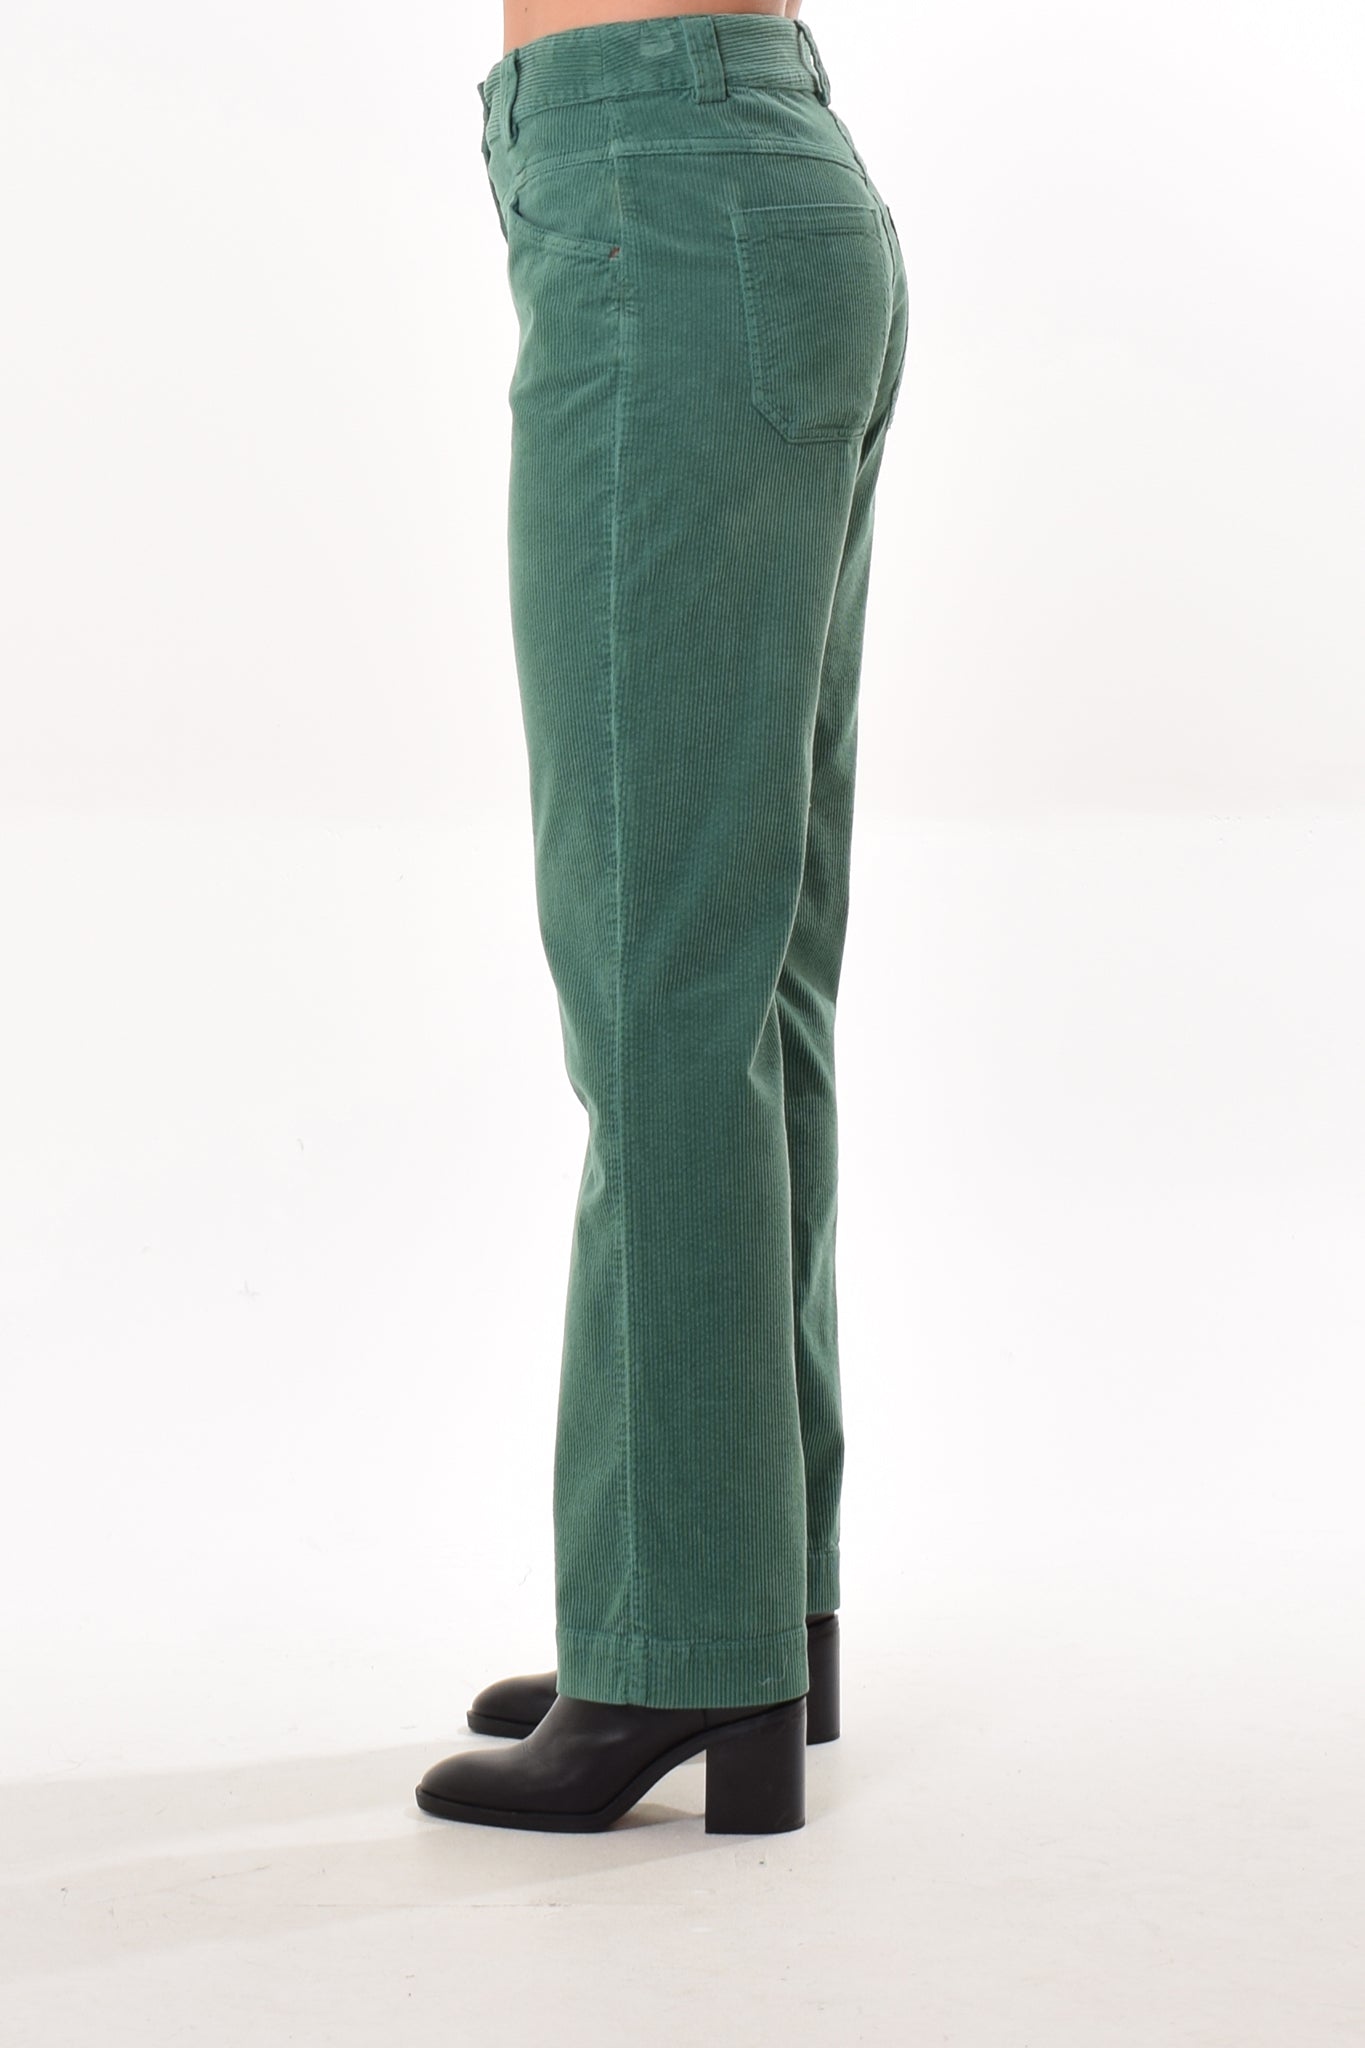 City trousers in Spring (big cotton corduroy)